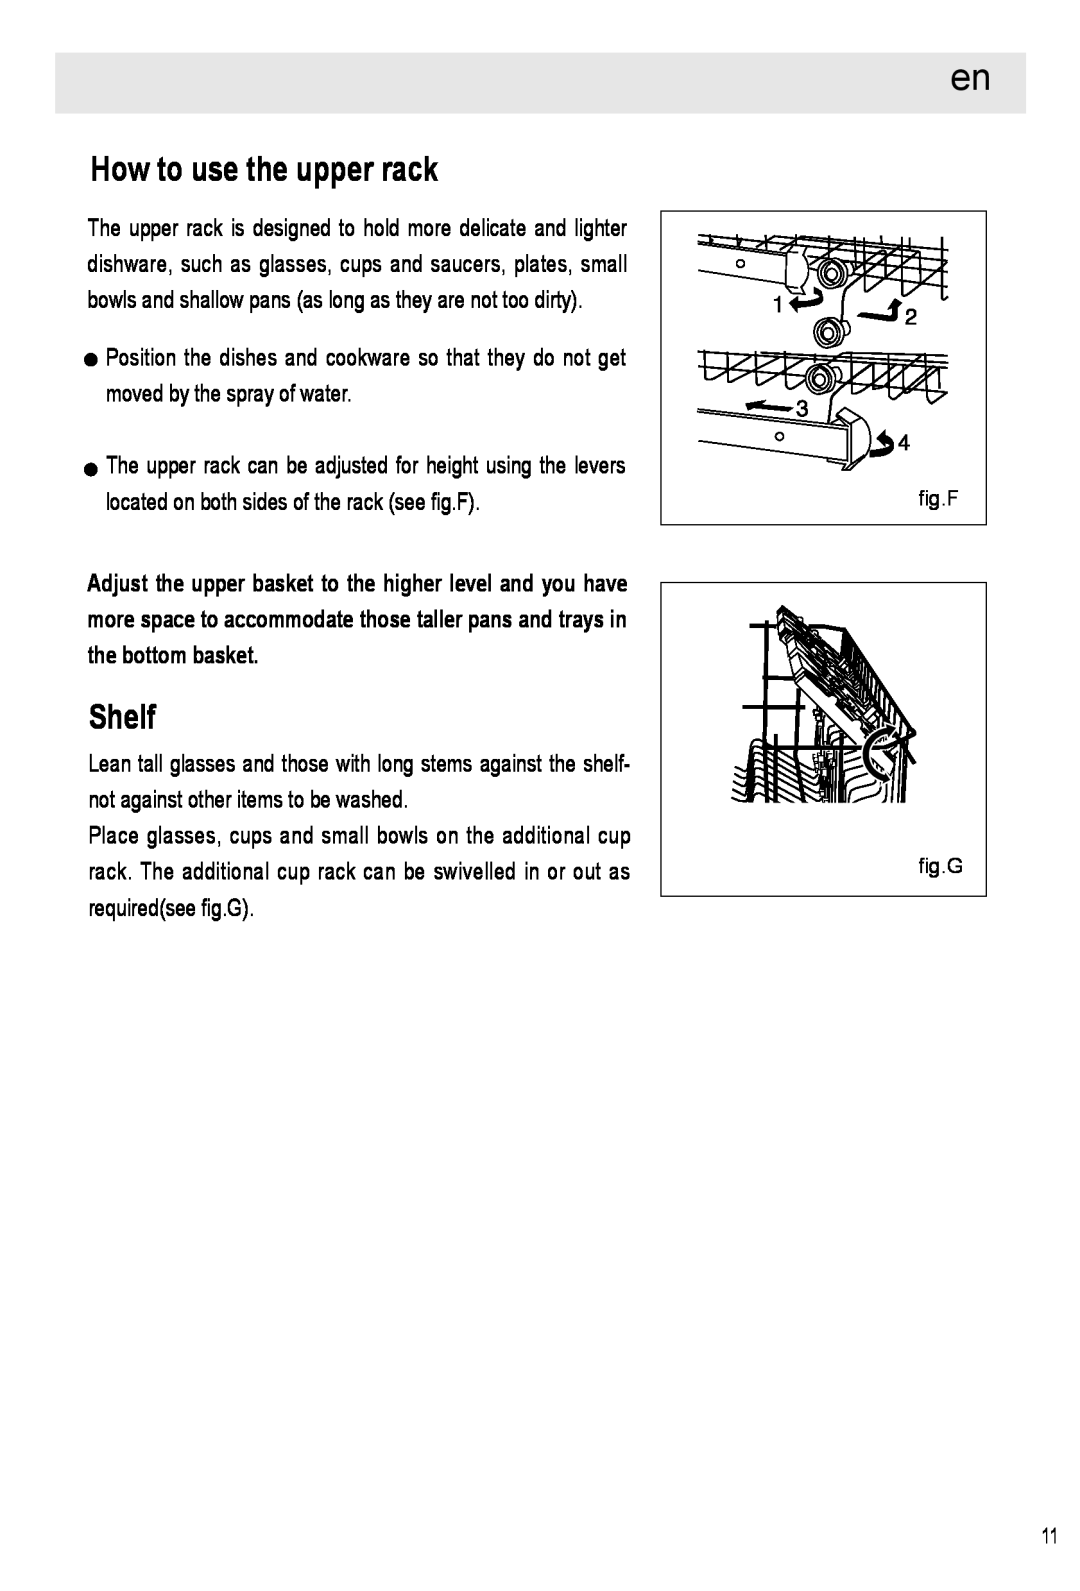 Haier HDW12-SFE1 operation manual How to use the upper rack, Shelf, fig.F, fig.G 